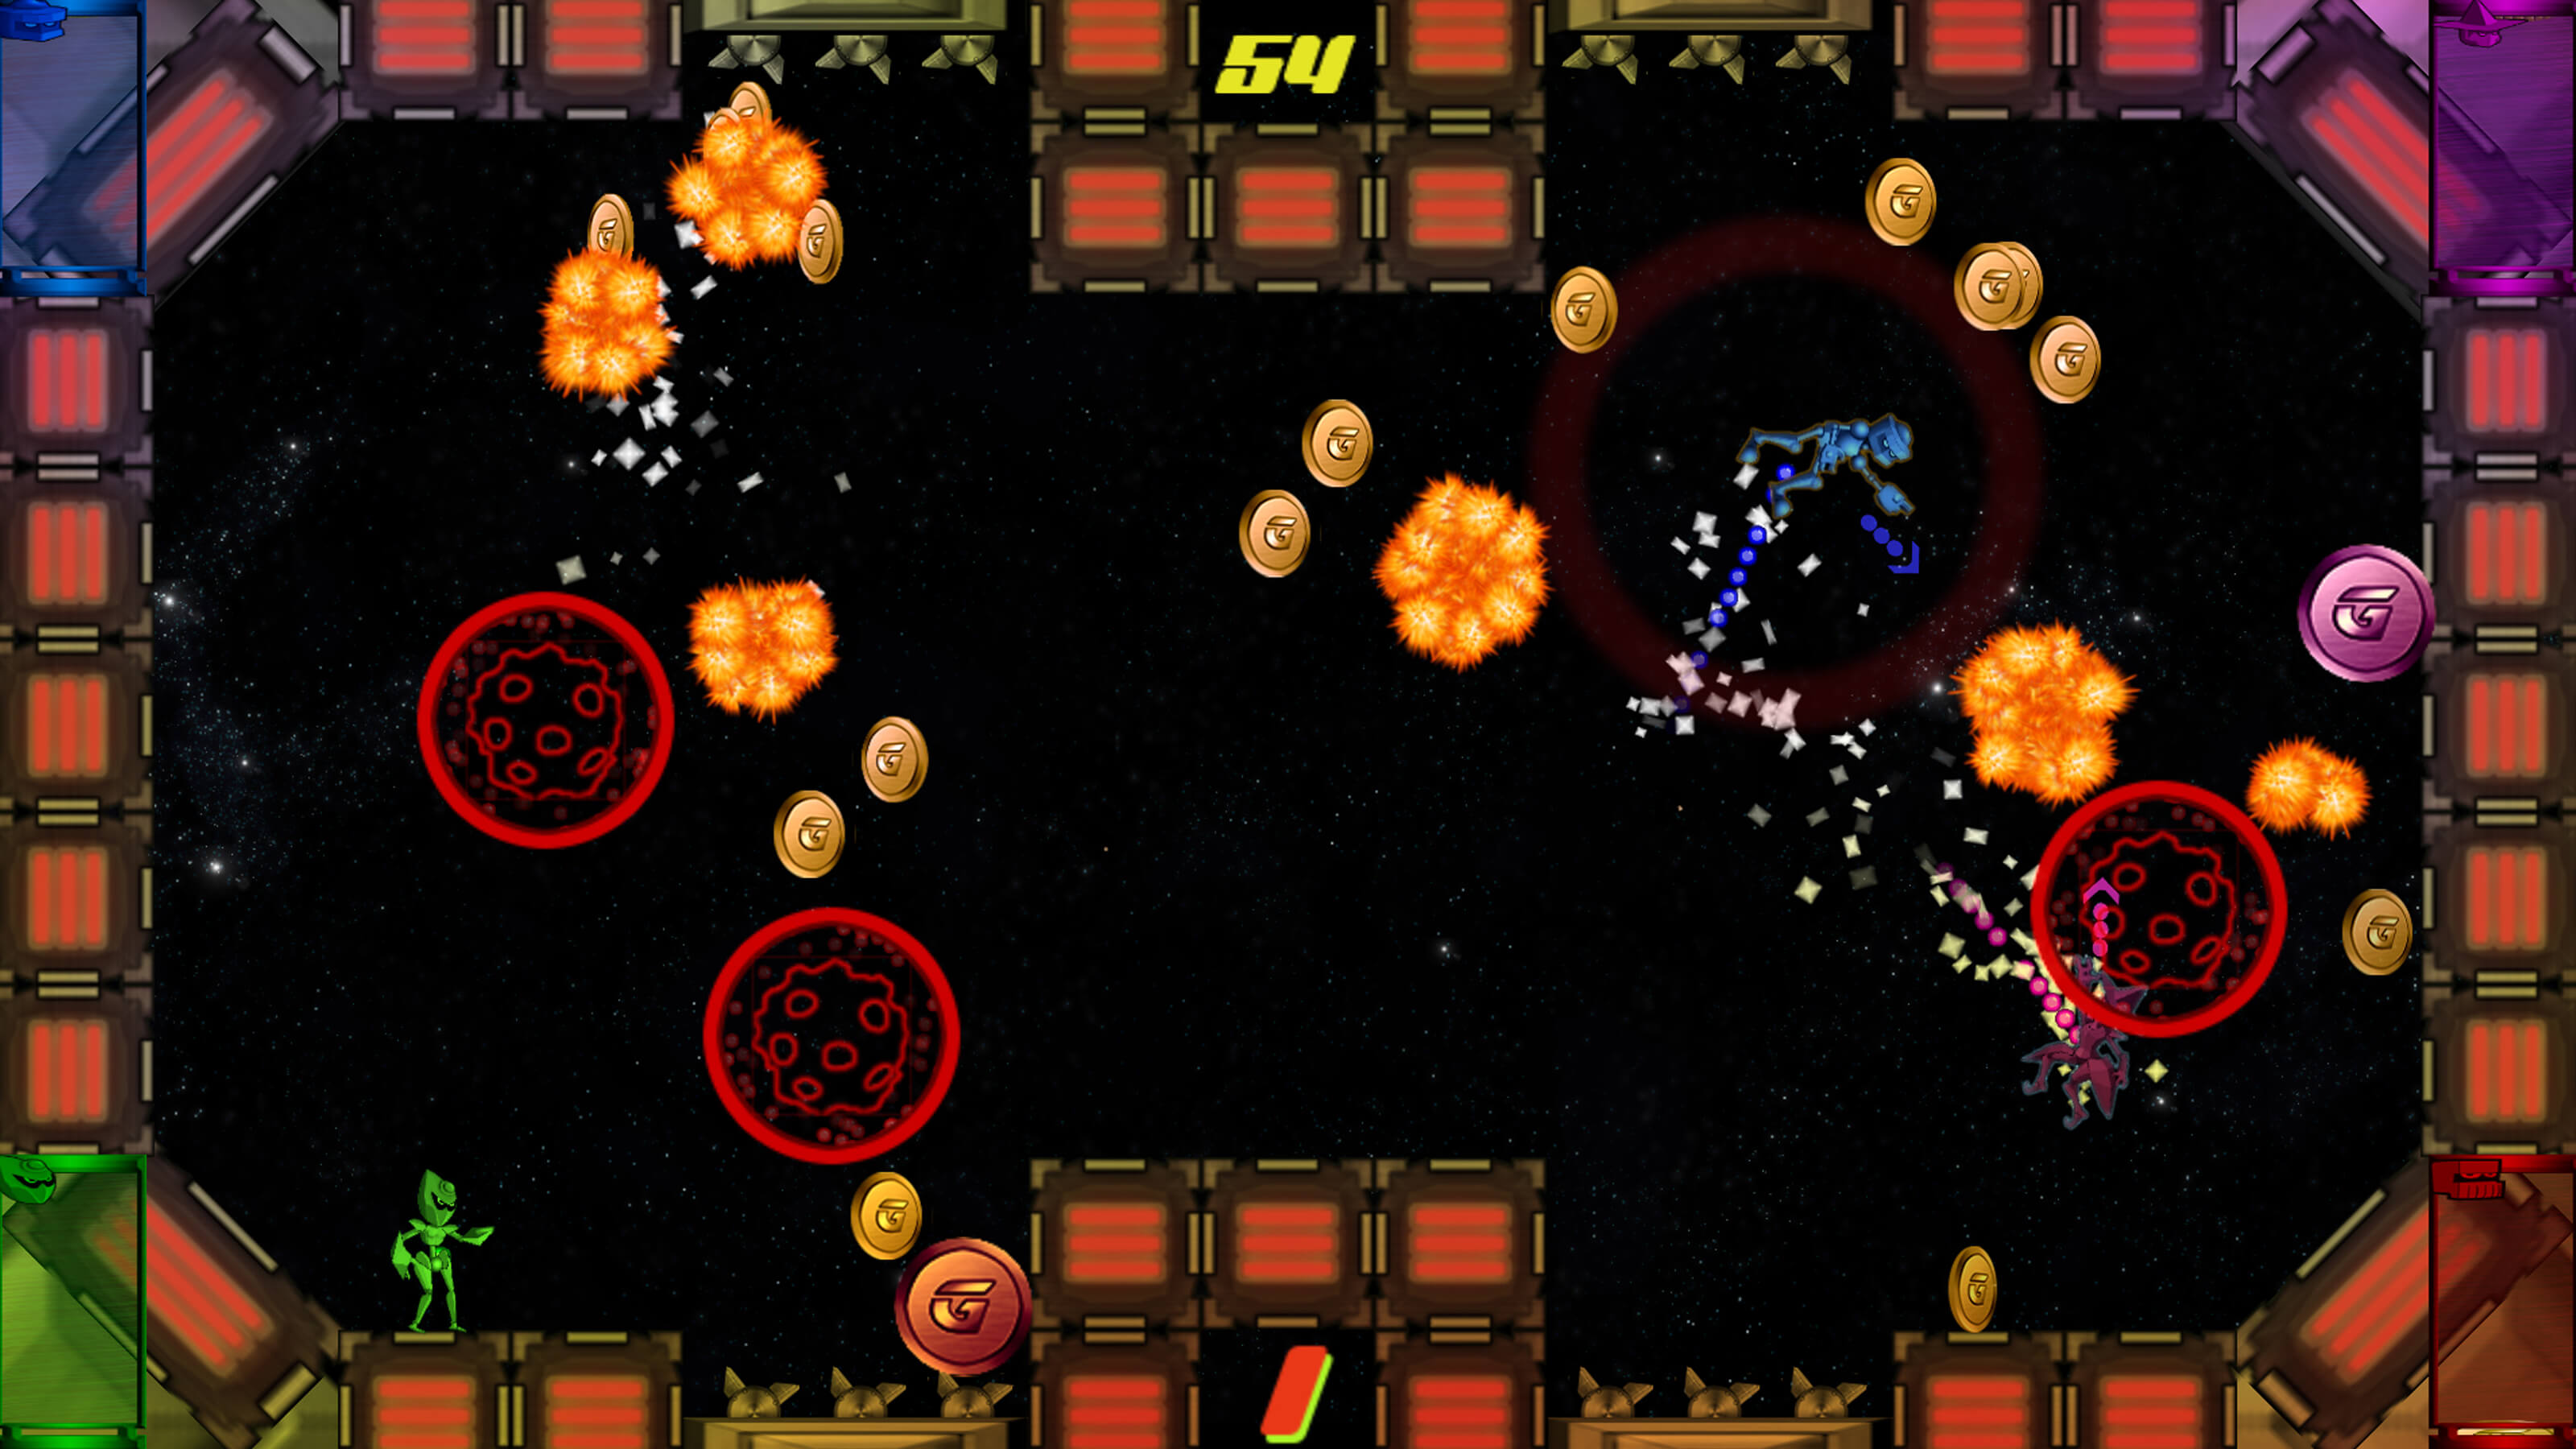 A green, blue, and pink robot duke it out in the arena, while explosions, coins and asteroids litter the screen.